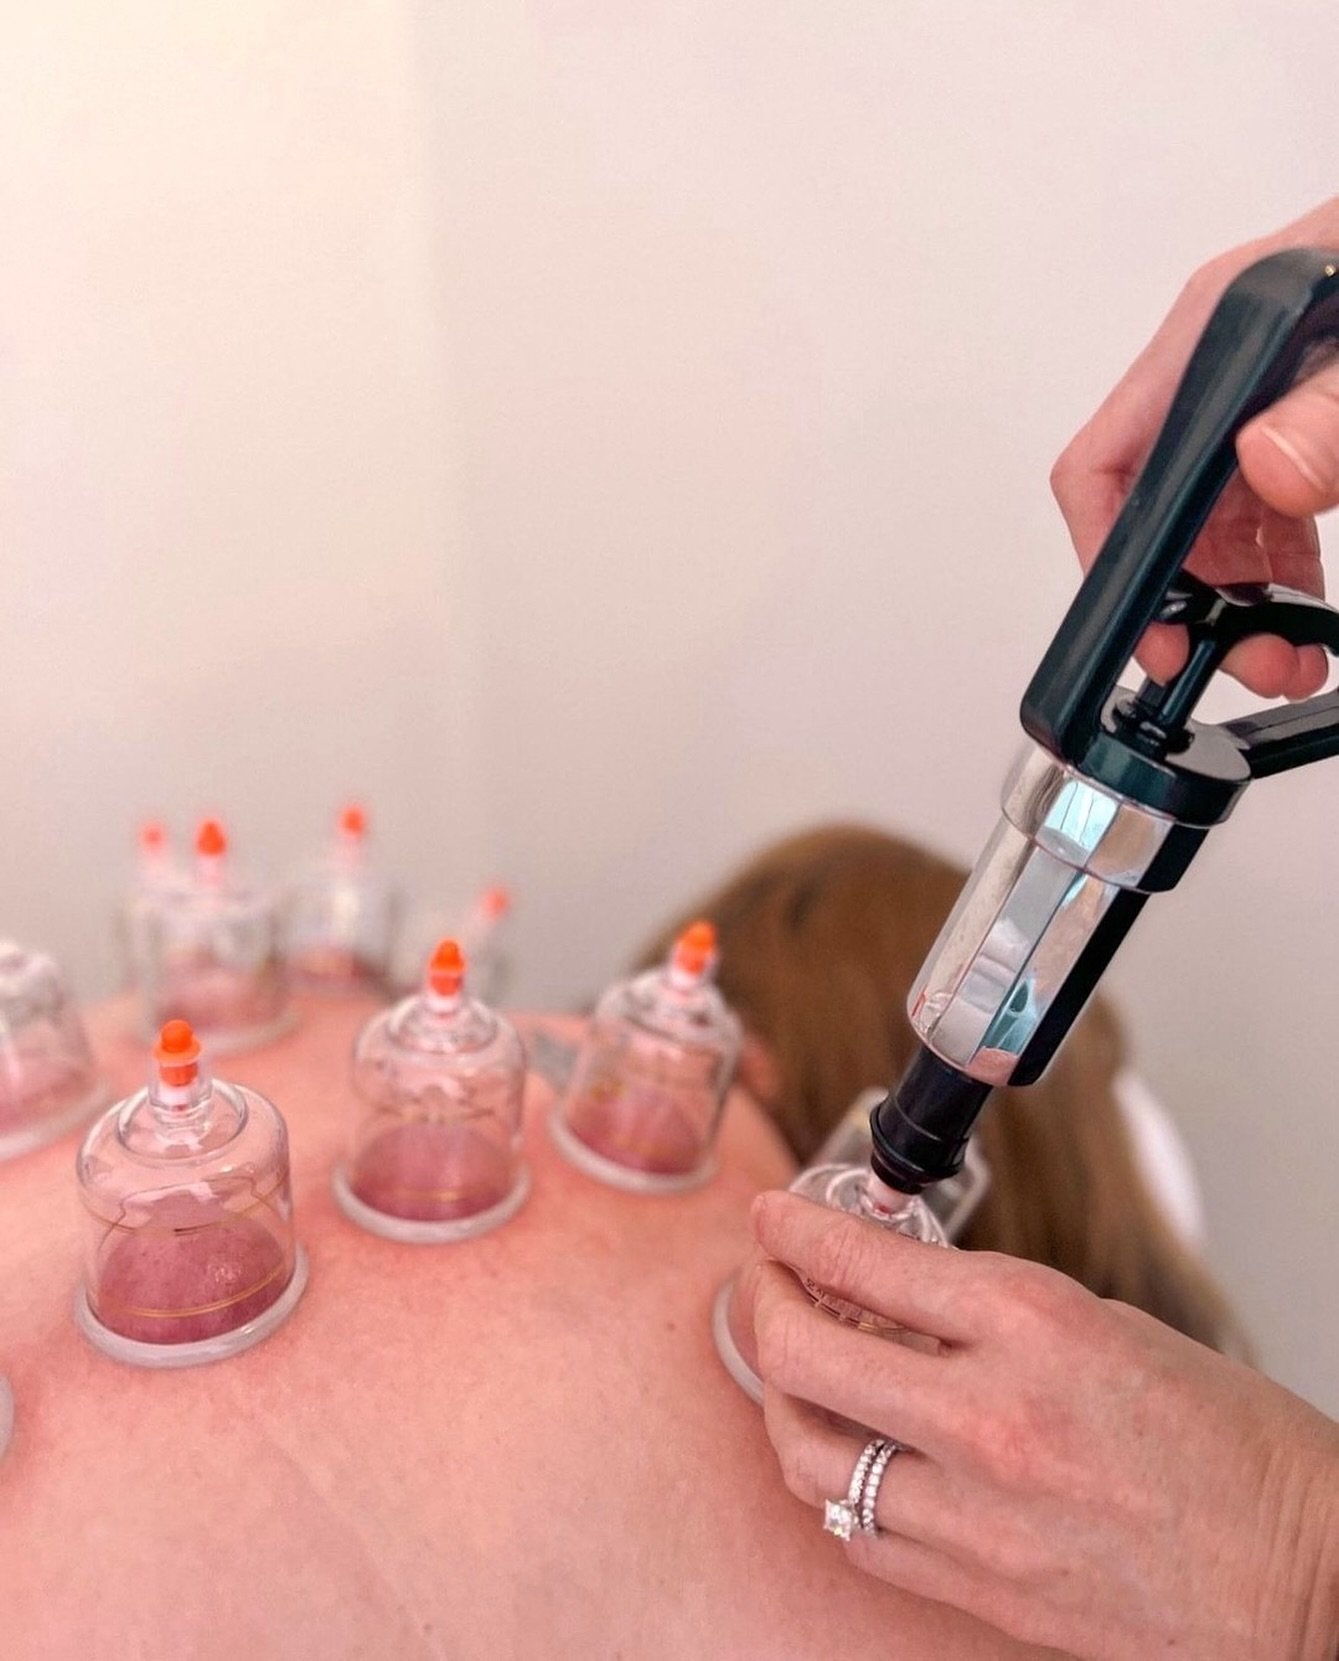 The many wonderful benefits of Cupping!

Cupping therapy is a traditional Chinese practice used to holistically treat a variety of conditions.

&bull; Increases flow of &ldquo;Qi&rdquo; (life-energy) in the body
&bull; Releases muscle tension
&bull; 